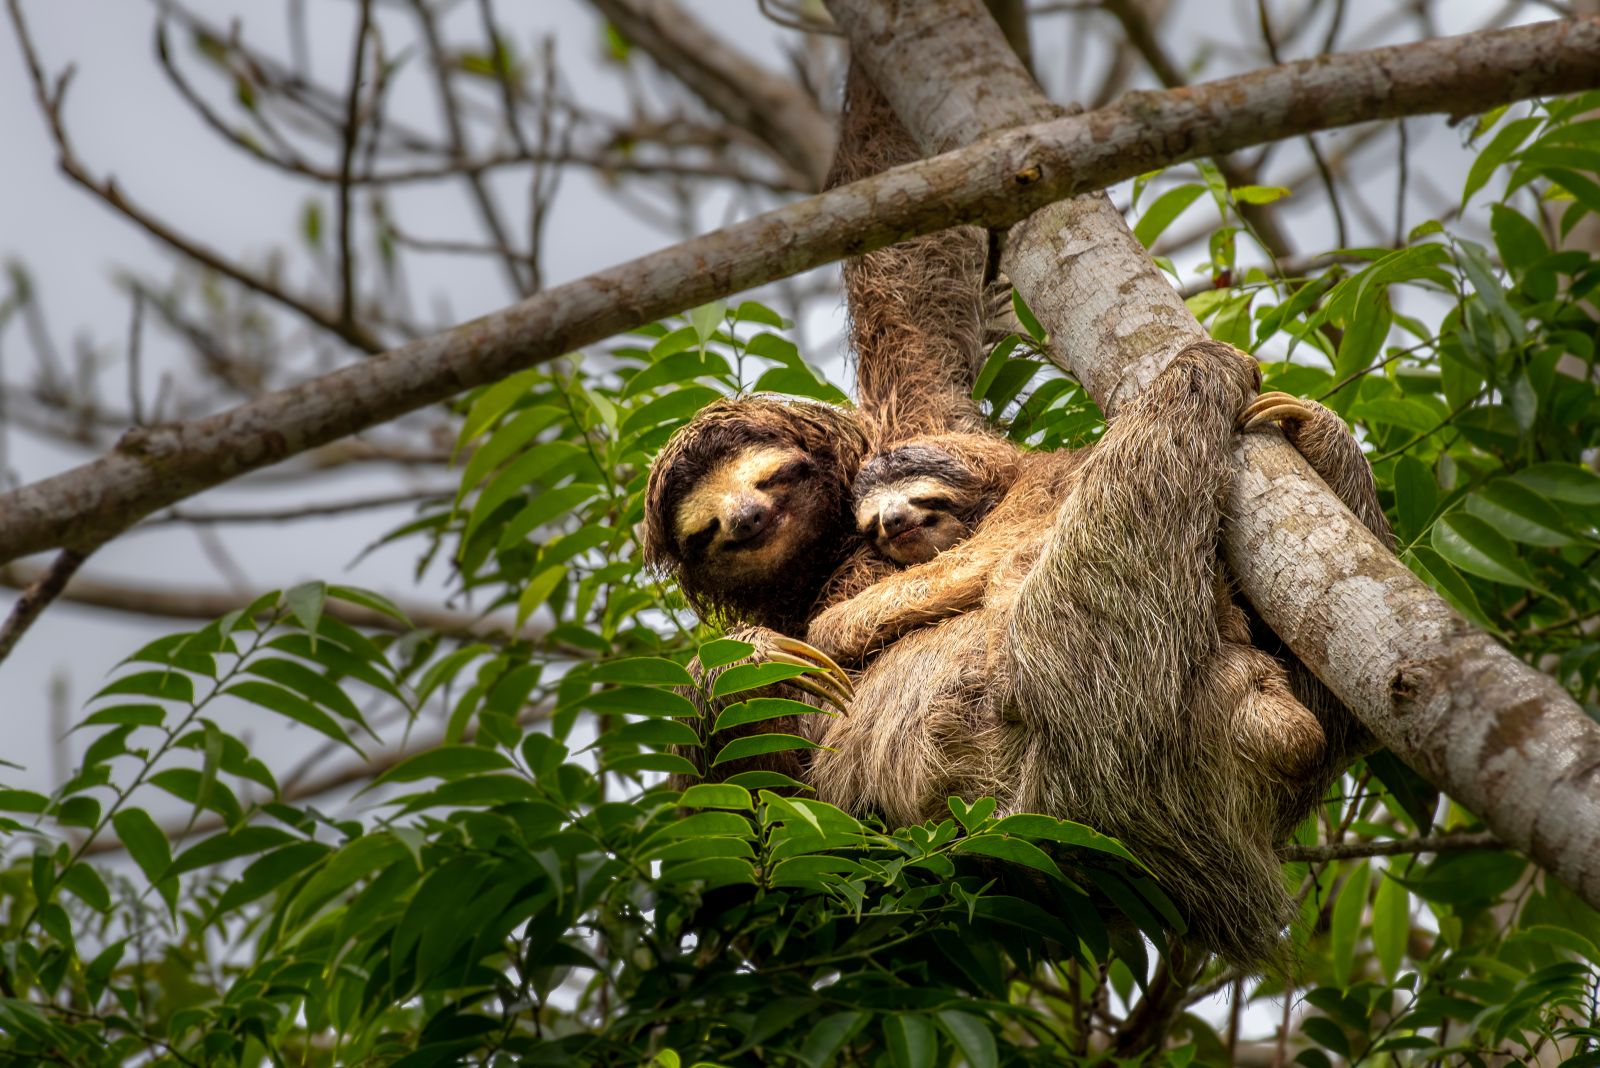 Mother and baby sloth in the treetops in Costa Rica